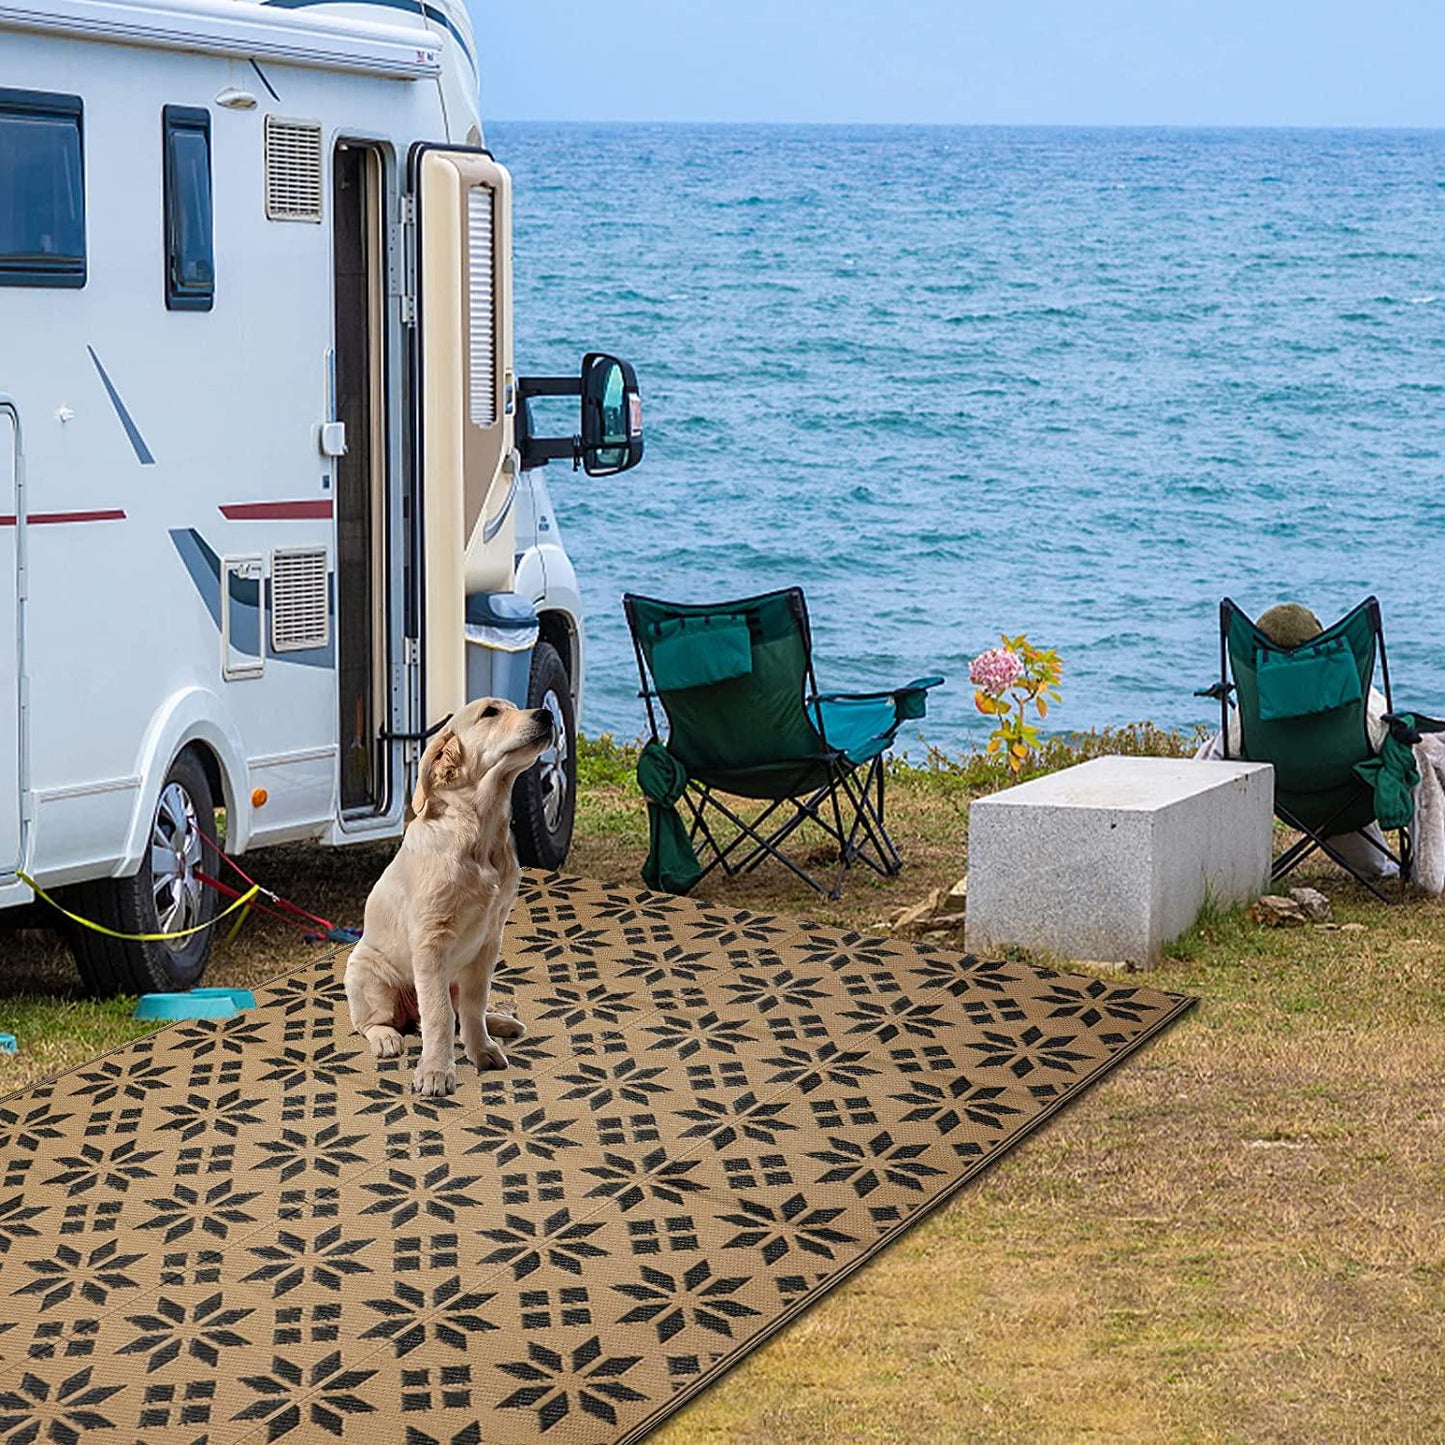 Reversible Rugs Plastic Rug Outdoor Rug Lightweight Outside Mats with Carrying Bag Modern Outdoor Rug for Patio Portable Mats for RV Backyard Deck Picnic Beach(5x7,Yellow Flower)